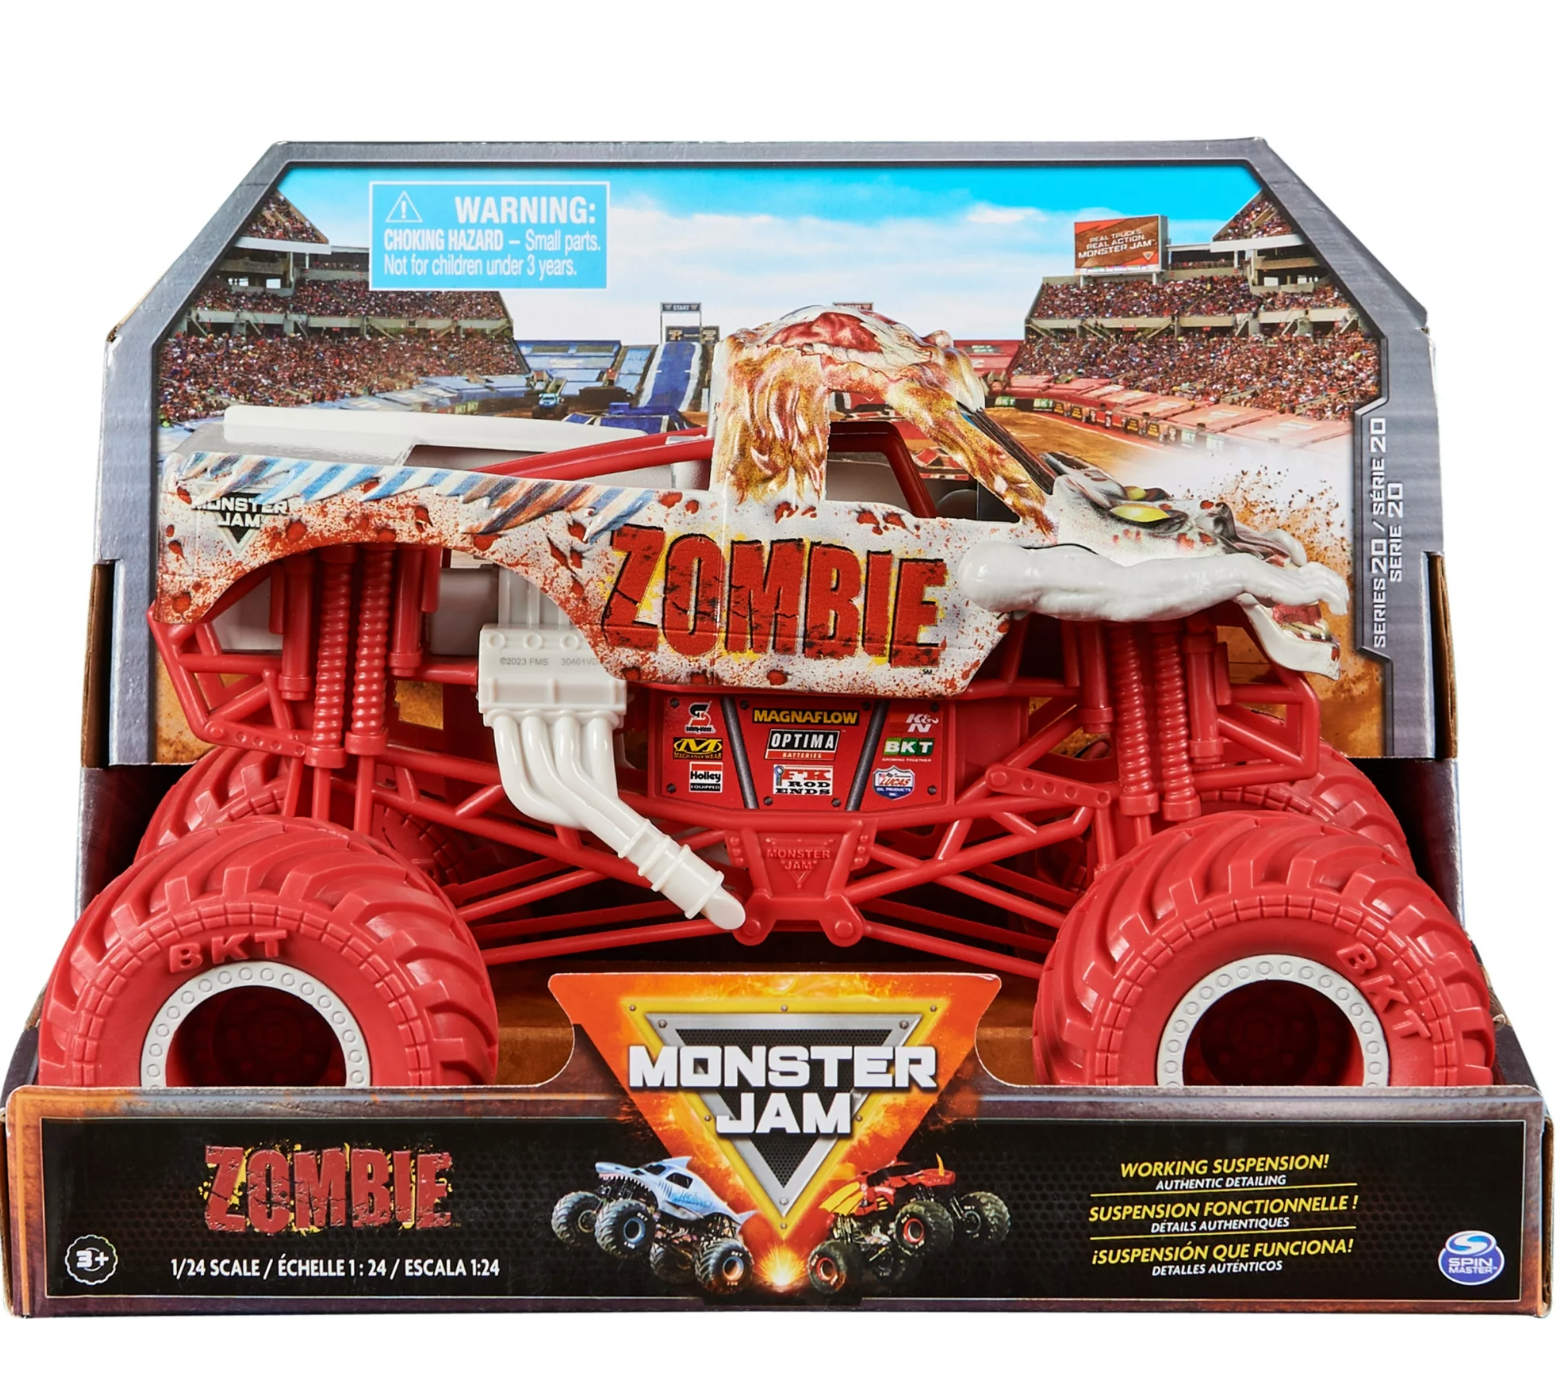 Monster Jam official 1/24 Scale